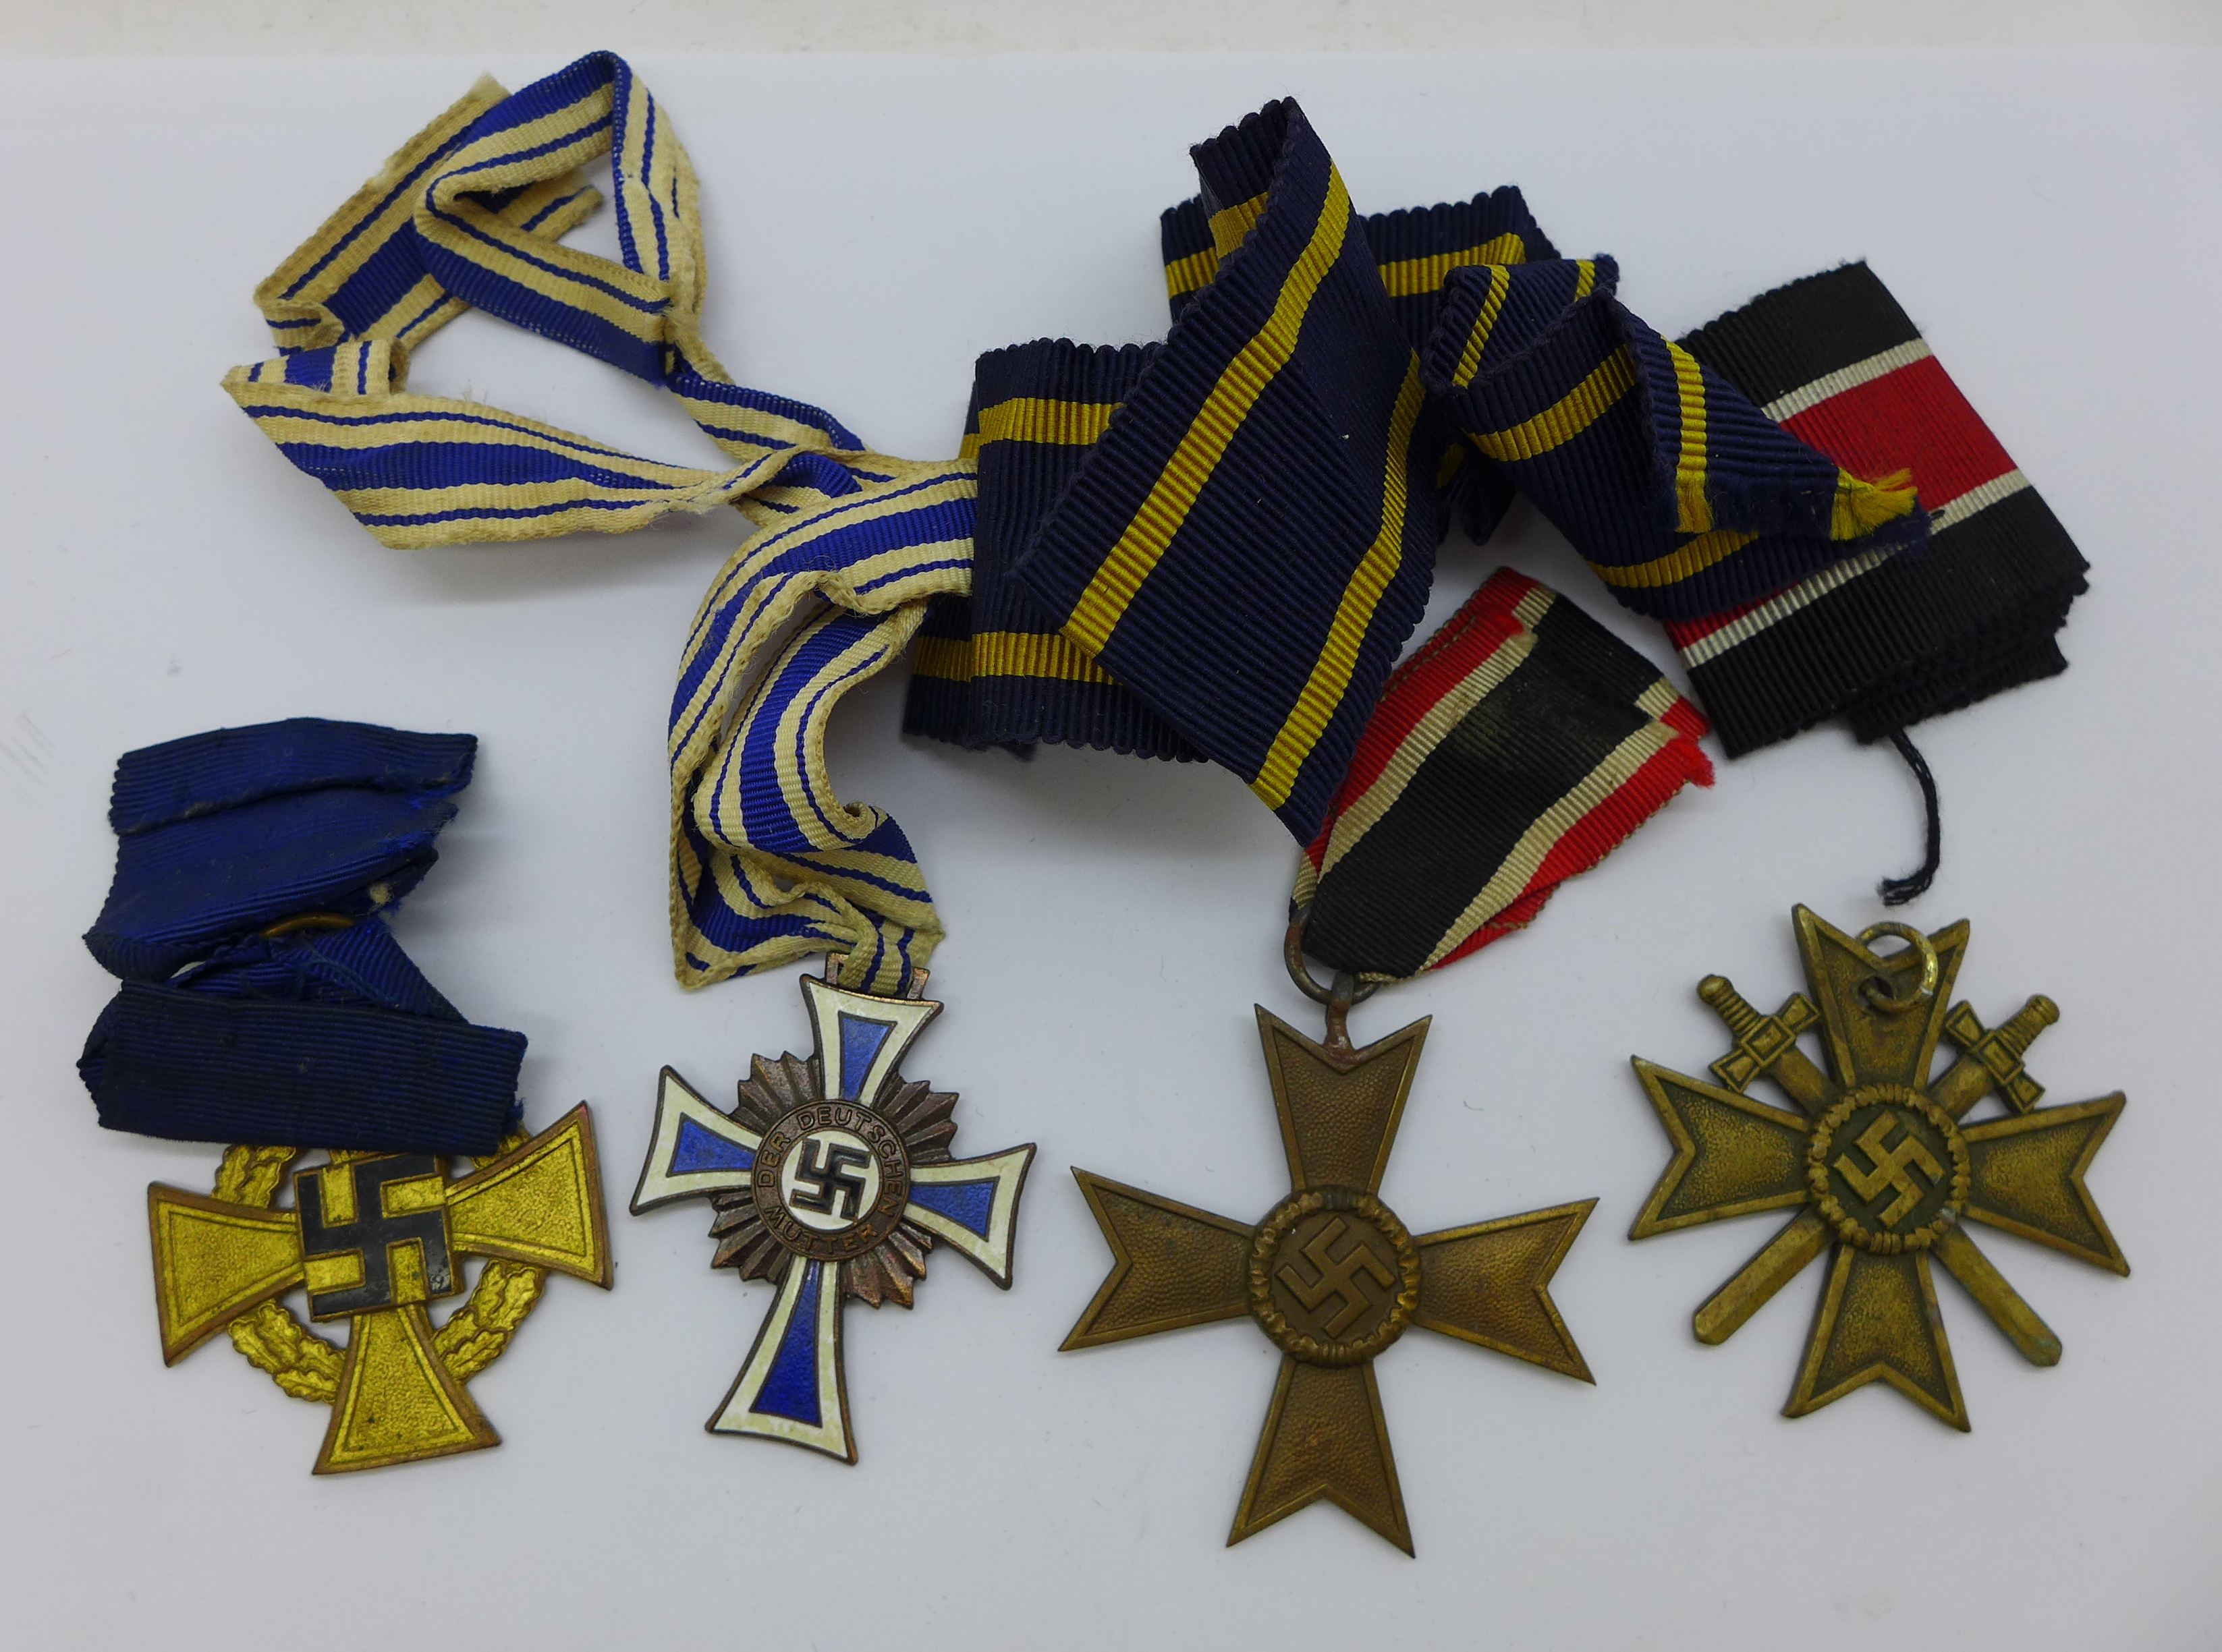 A German Mother's Cross medal and three other German military medals